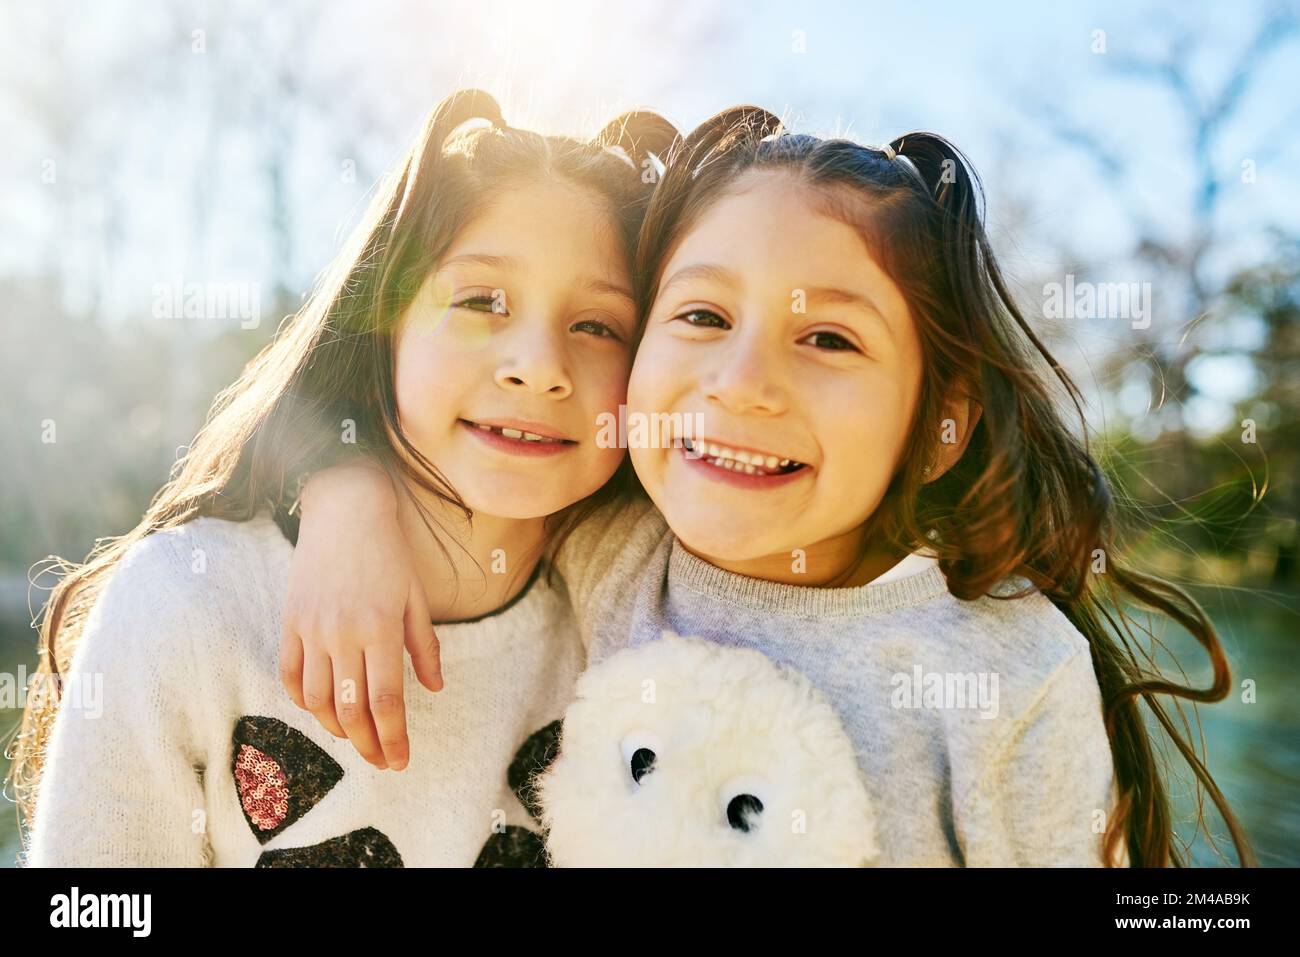 Im lucky my sister is my best friend. two adorable little girls holding each other outdoors. Stock Photo